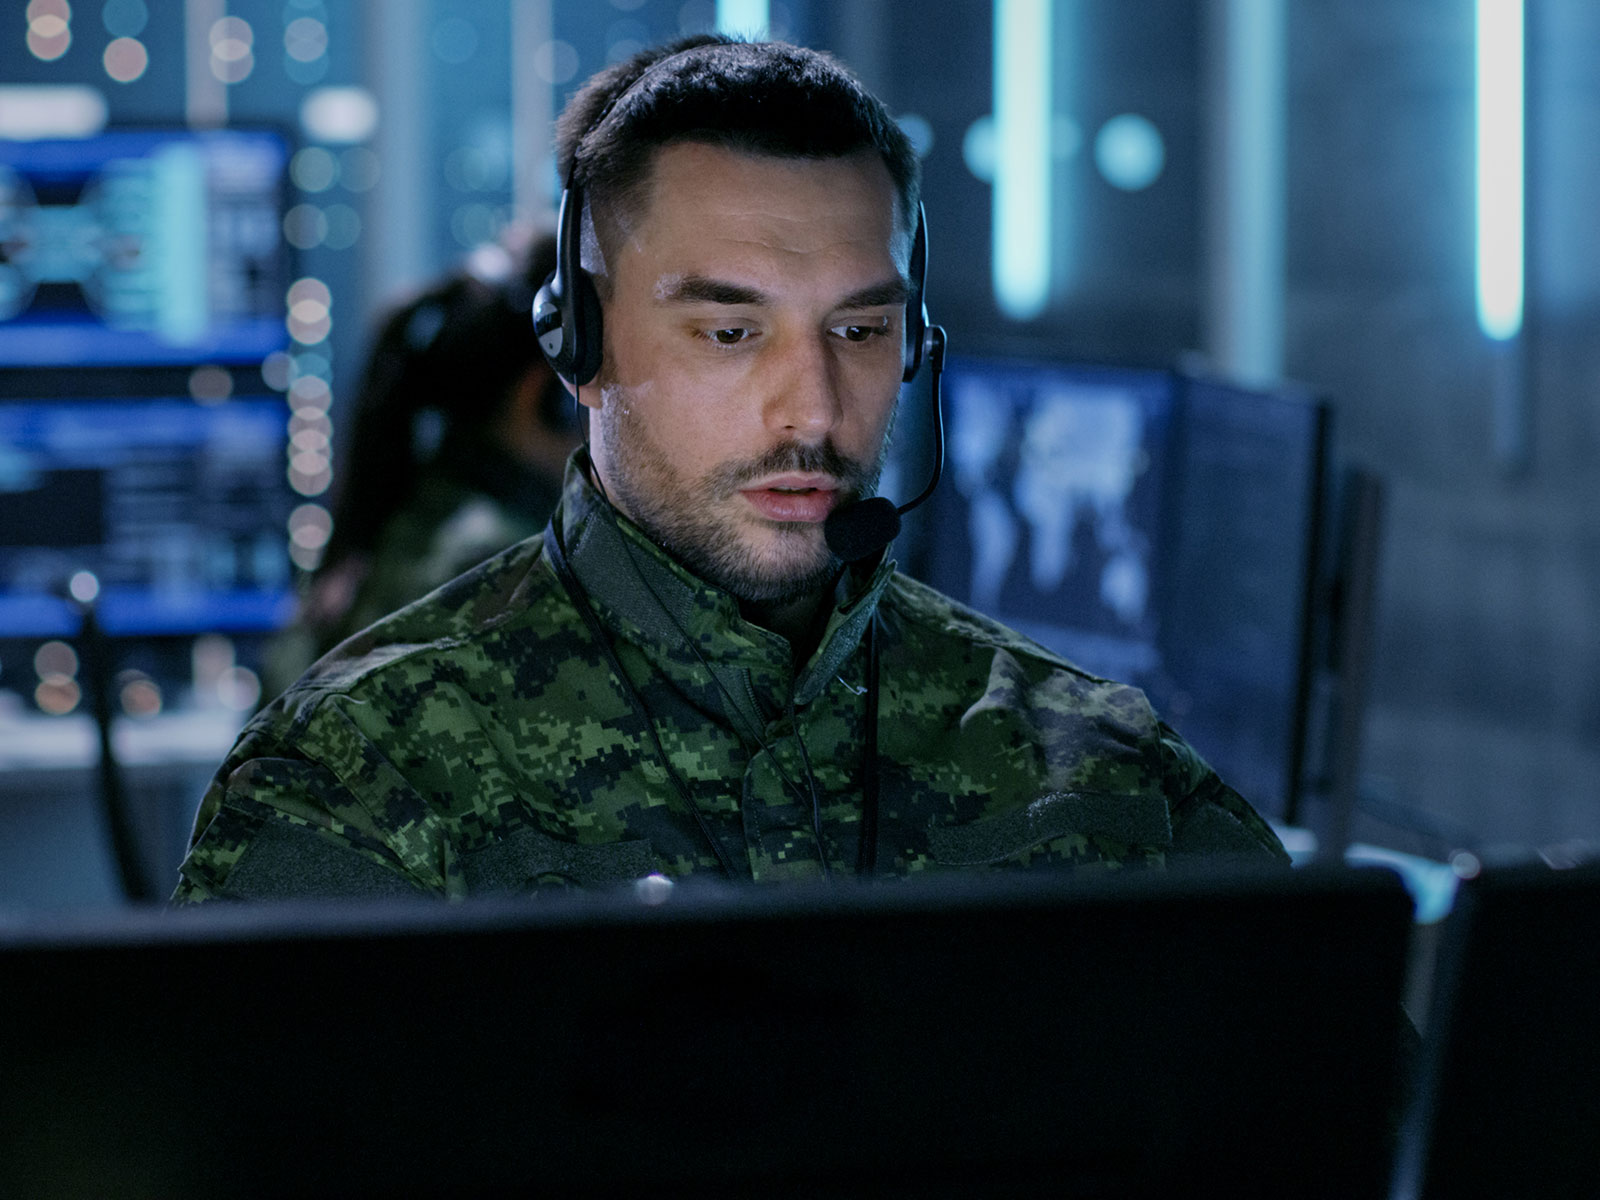 soldier sitting at a computer